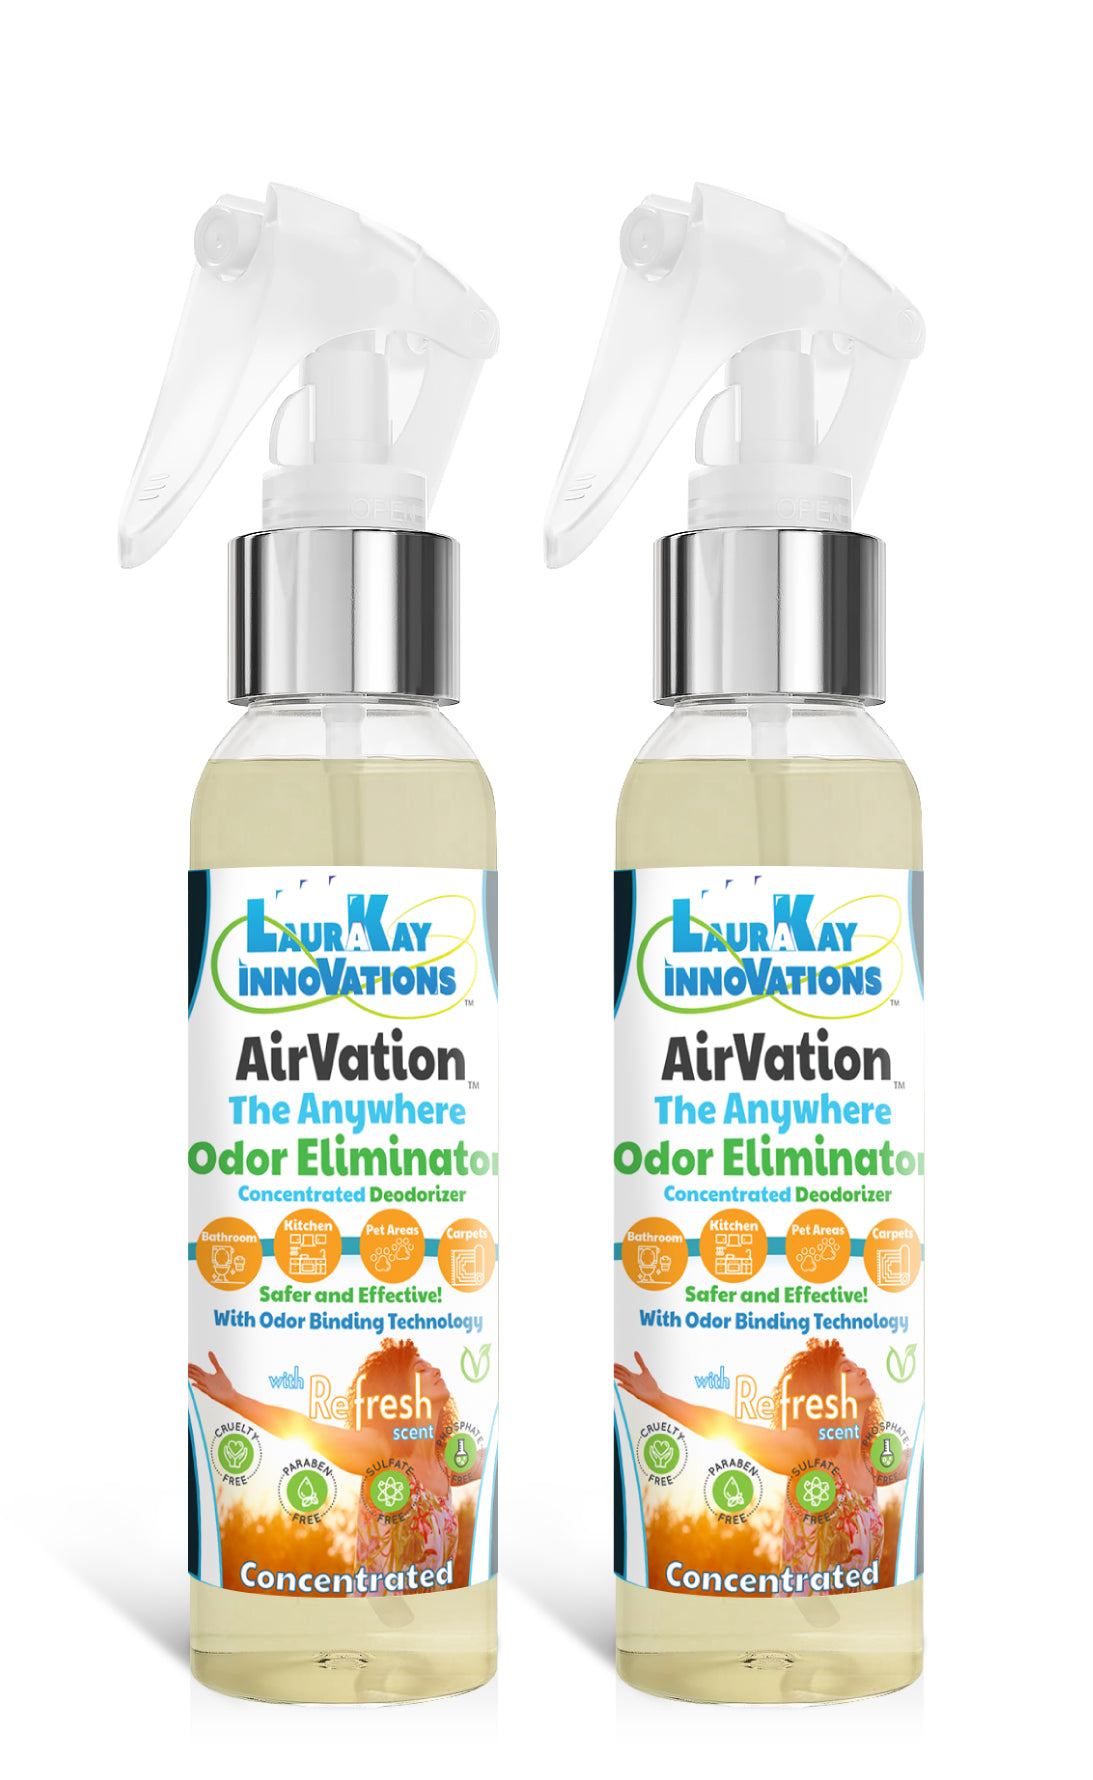 Odor Eliminating Air Freshener - AirVation™ The Safe Anywhere Deodorizer Concentrated Odor Binding Air Freshener for Fabrics & Air - 8 fl oz 2 Pack